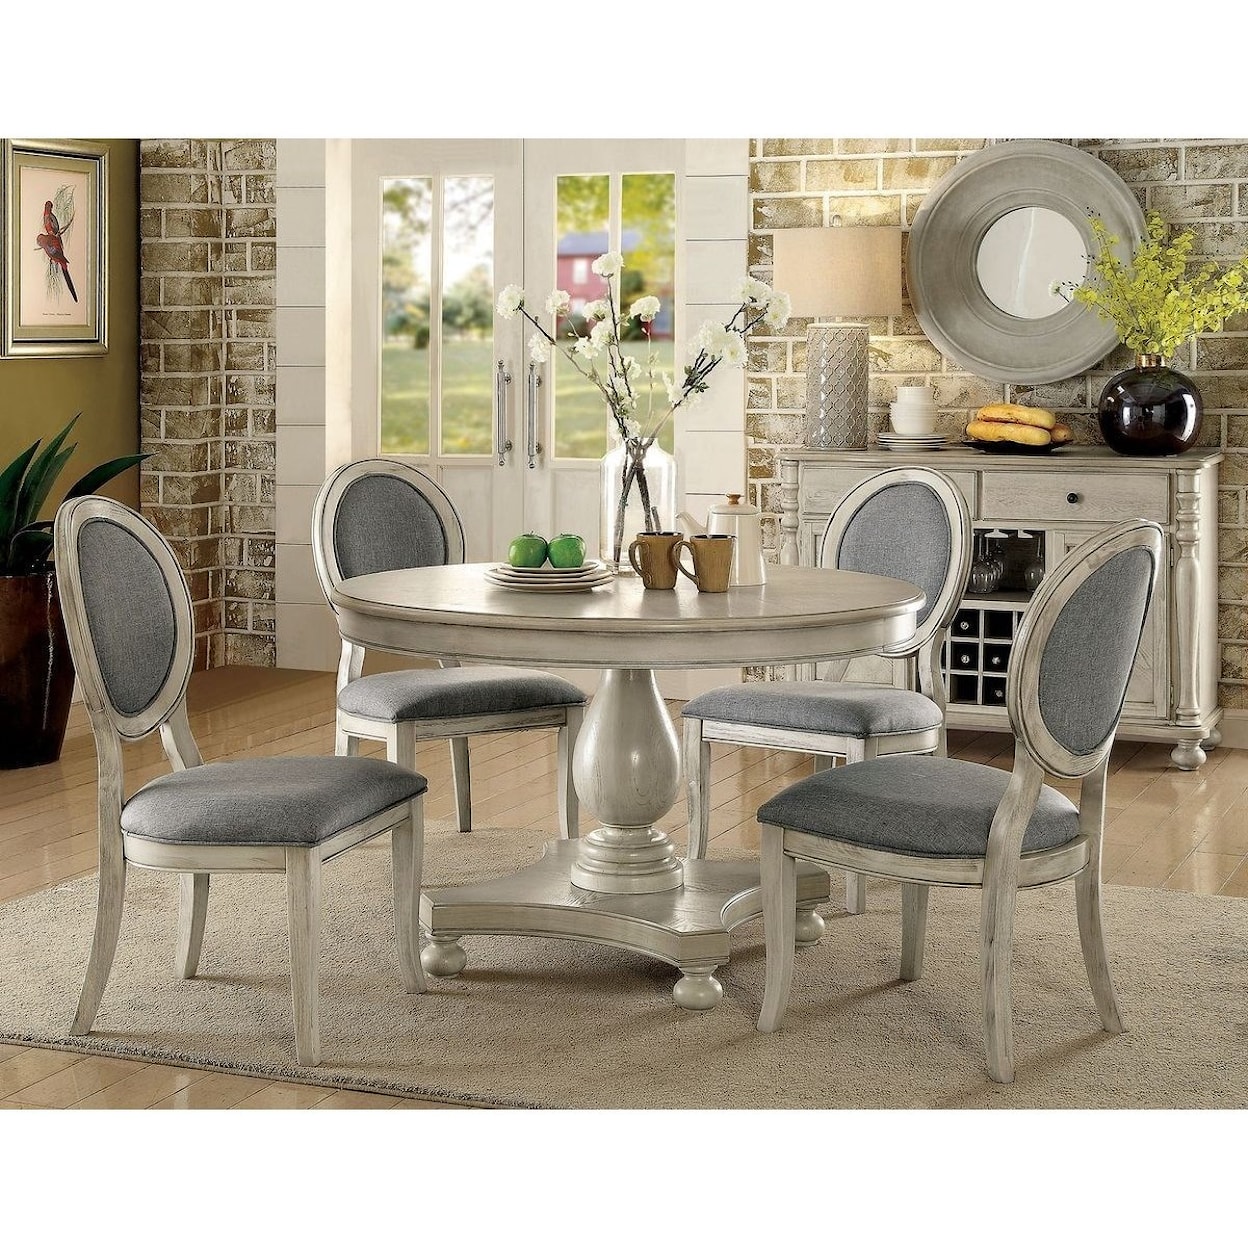 FUSA Kathryn Round Dining Table